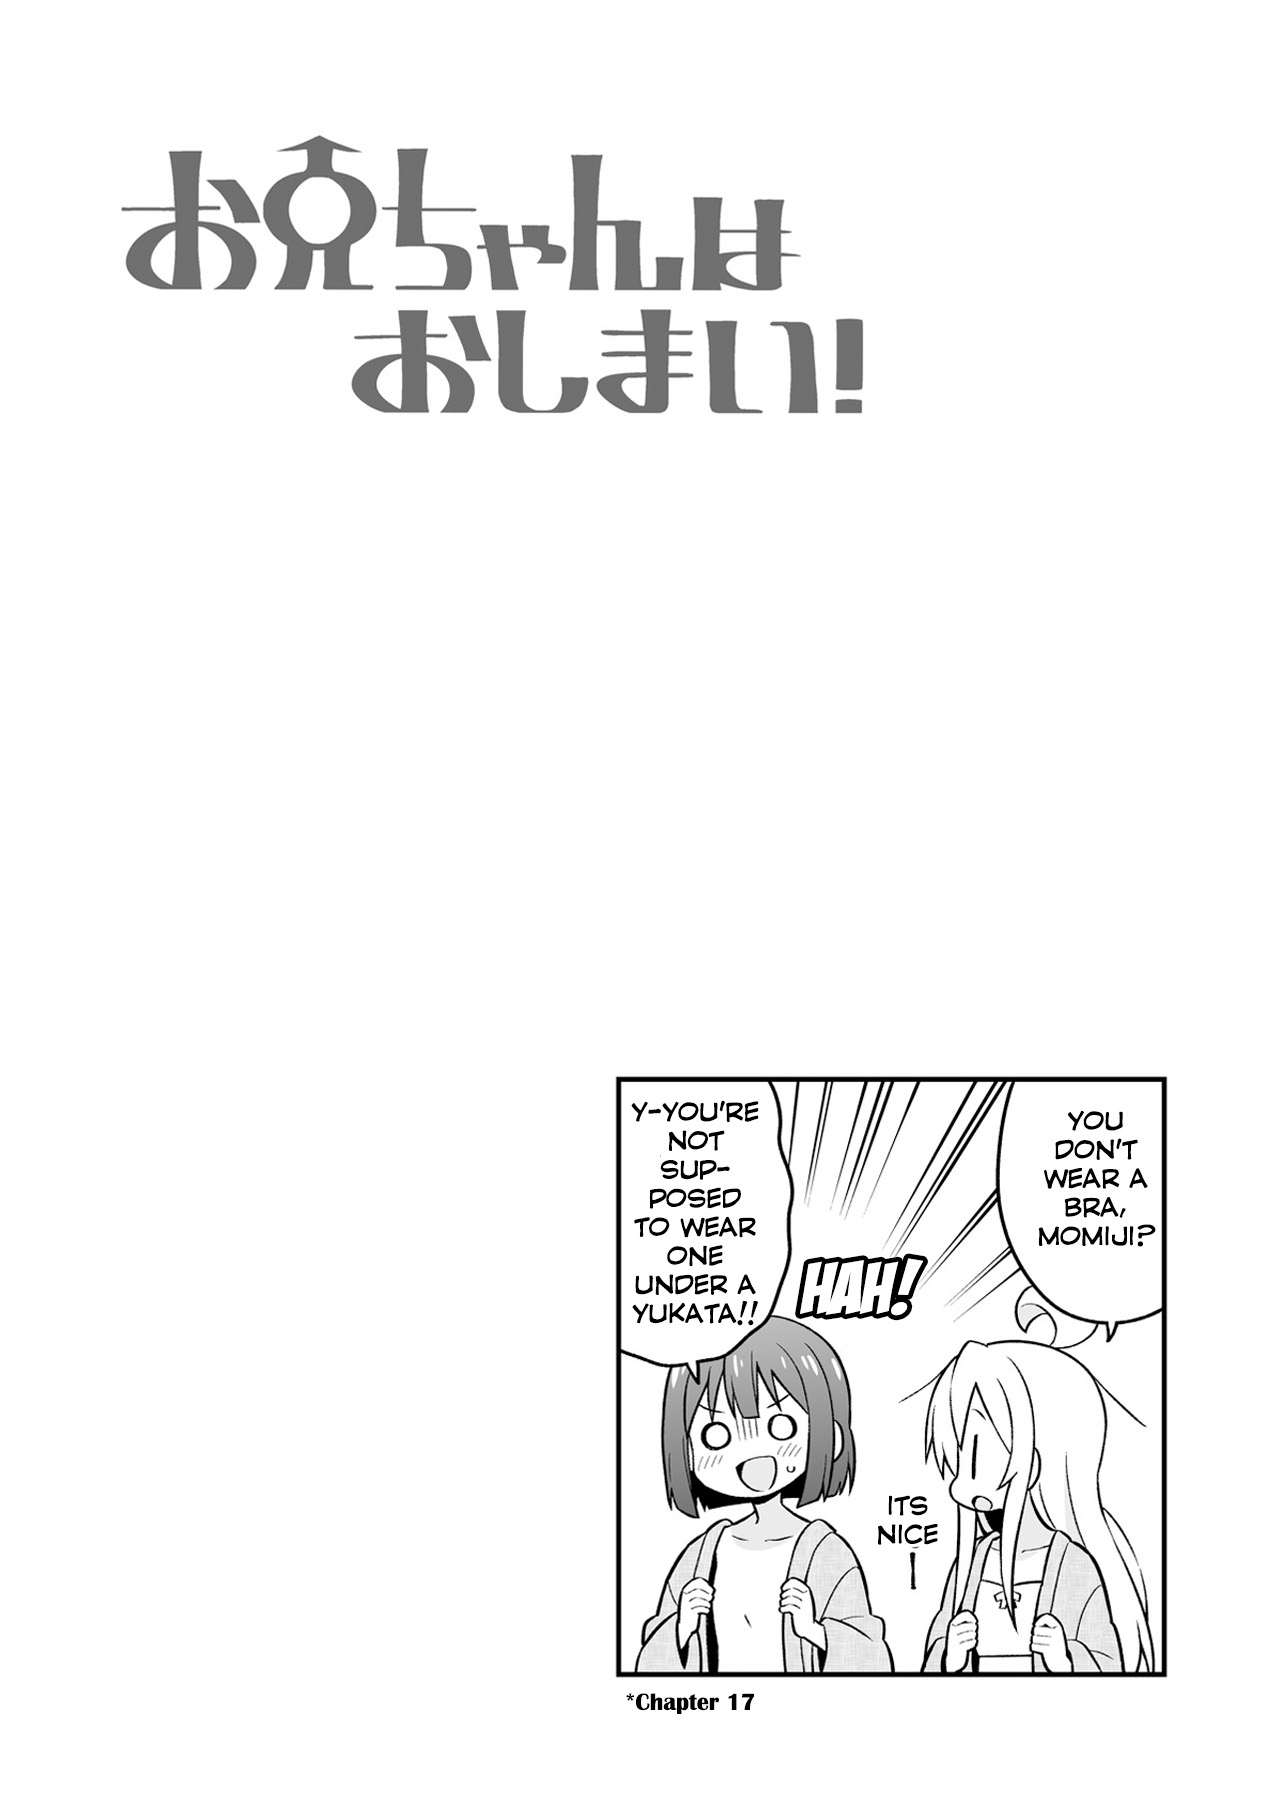 Onii chan is Done For! Vol. 2 Ch. 20.9 Chapter 11 20 Mini Extras